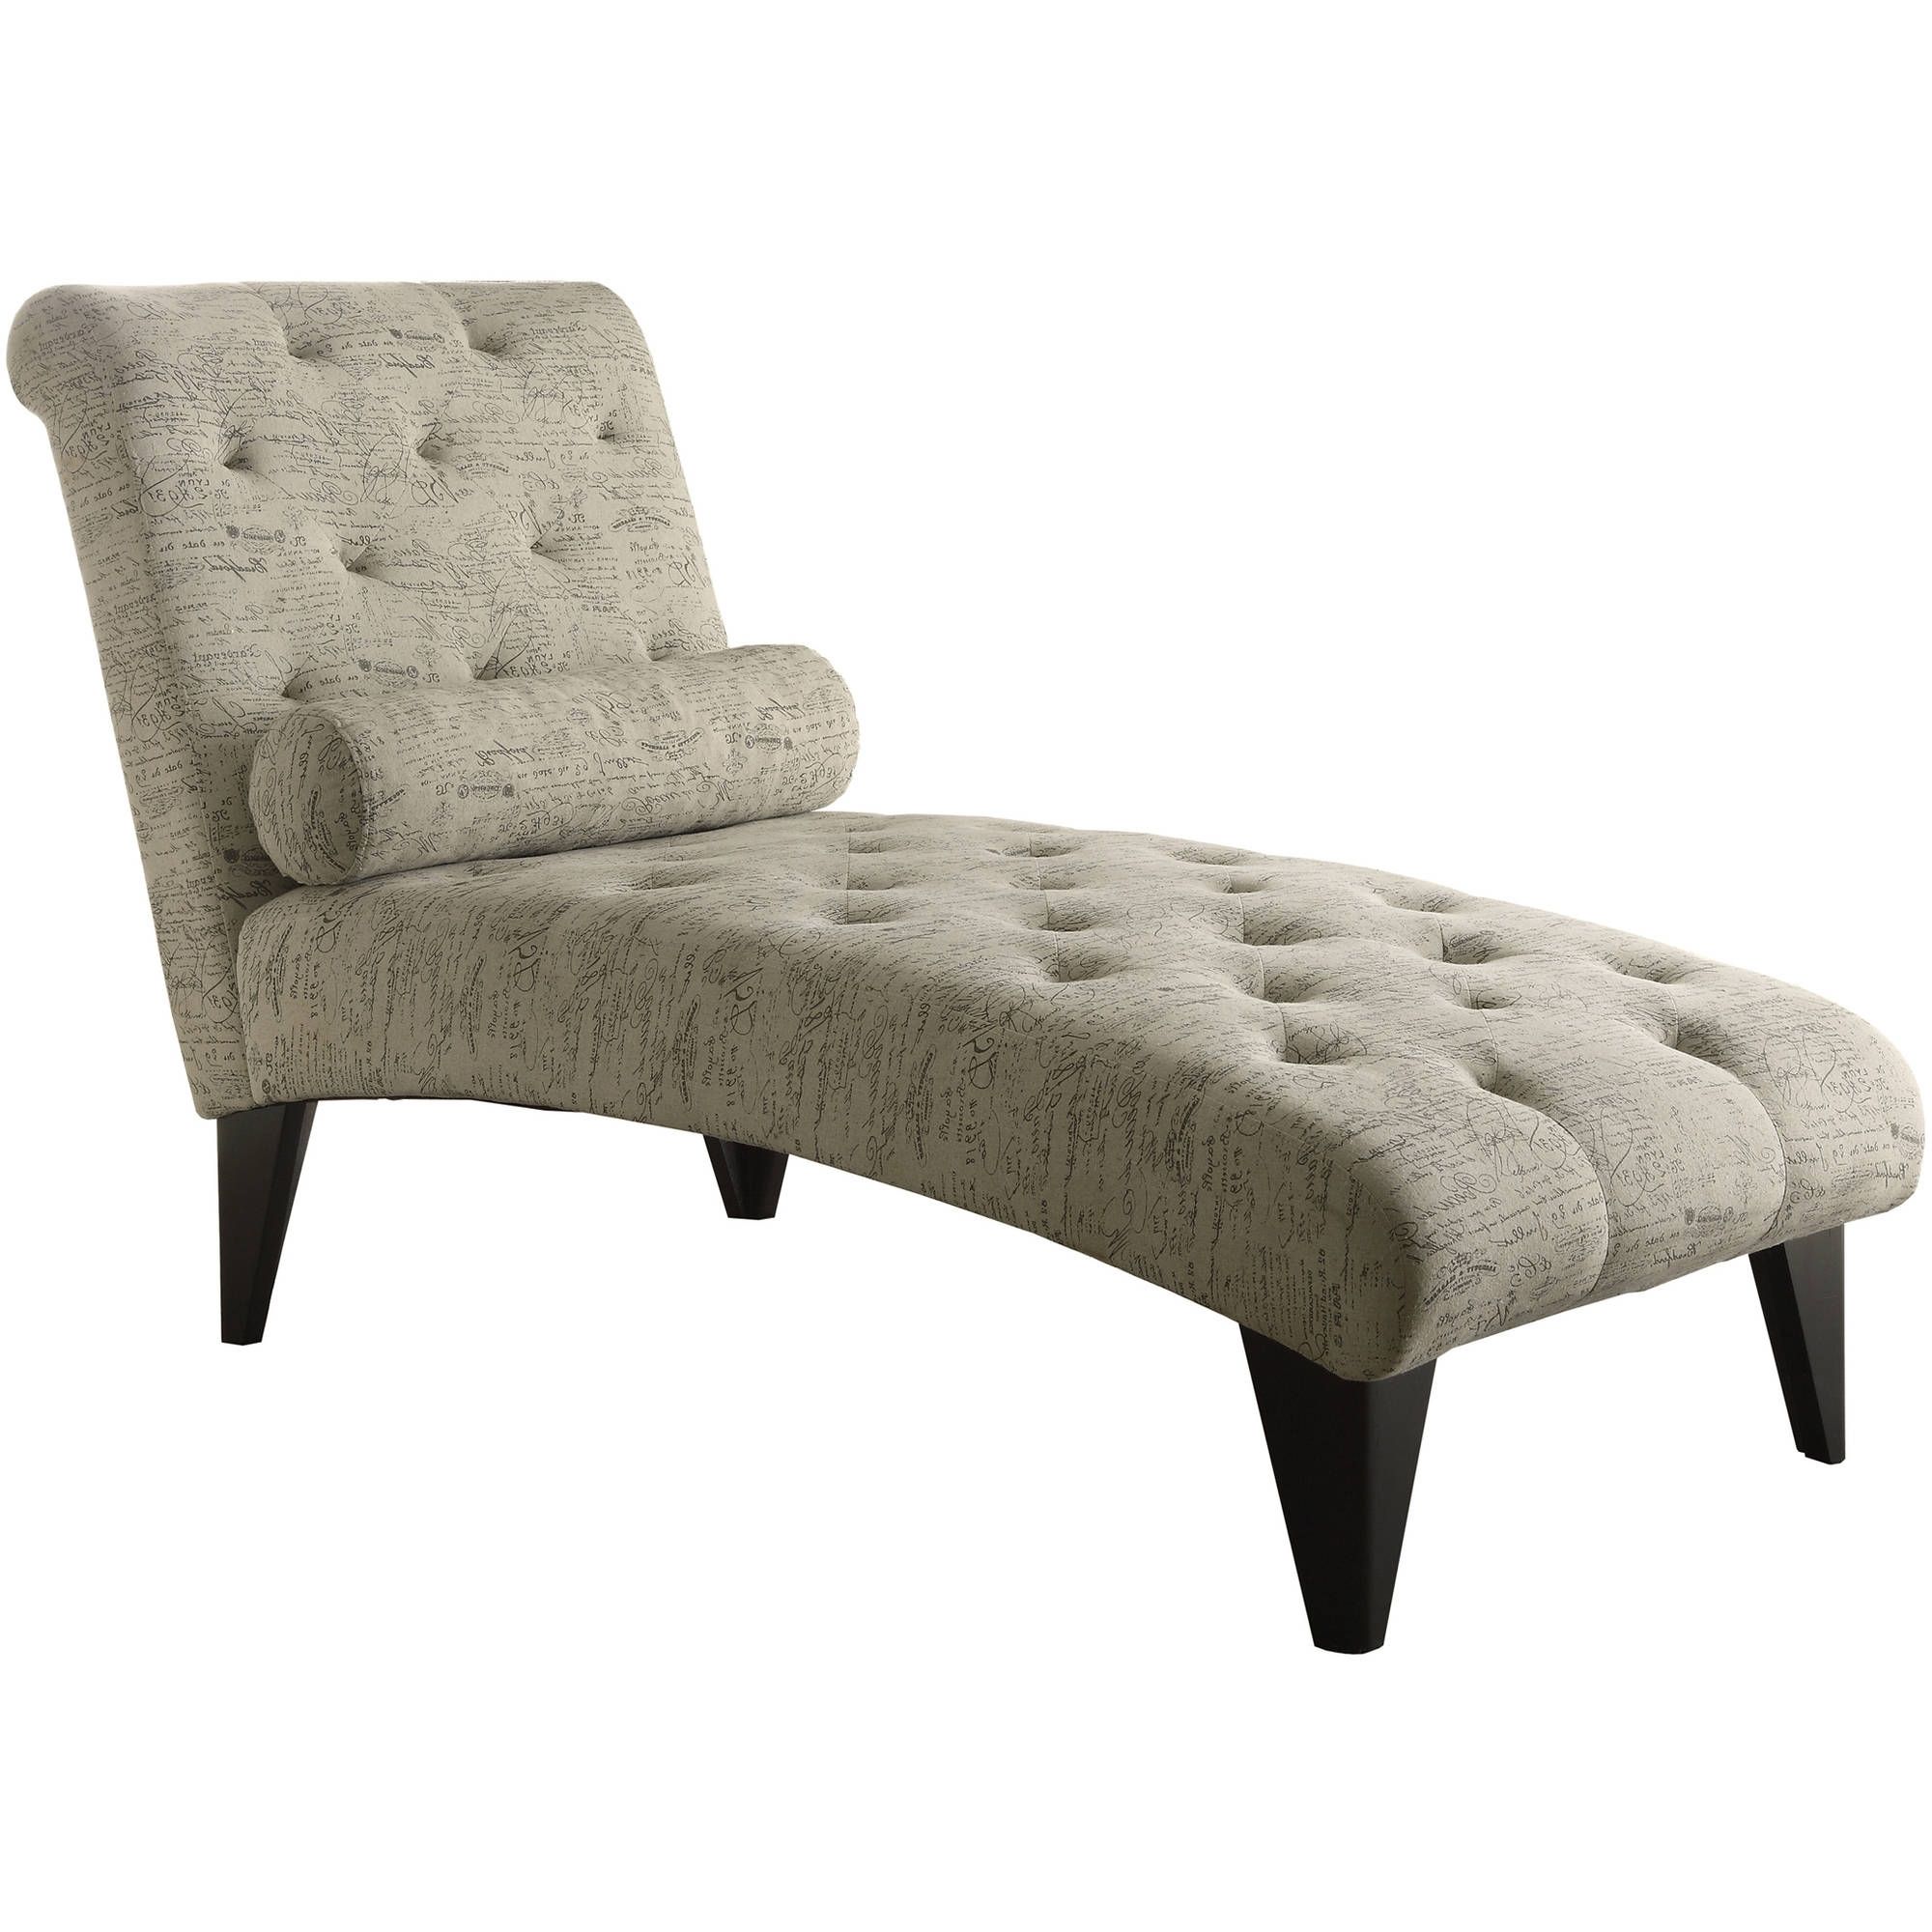 Popular Sofa Chaise Lounges Intended For Chaise Lounges – Walmart (View 11 of 15)